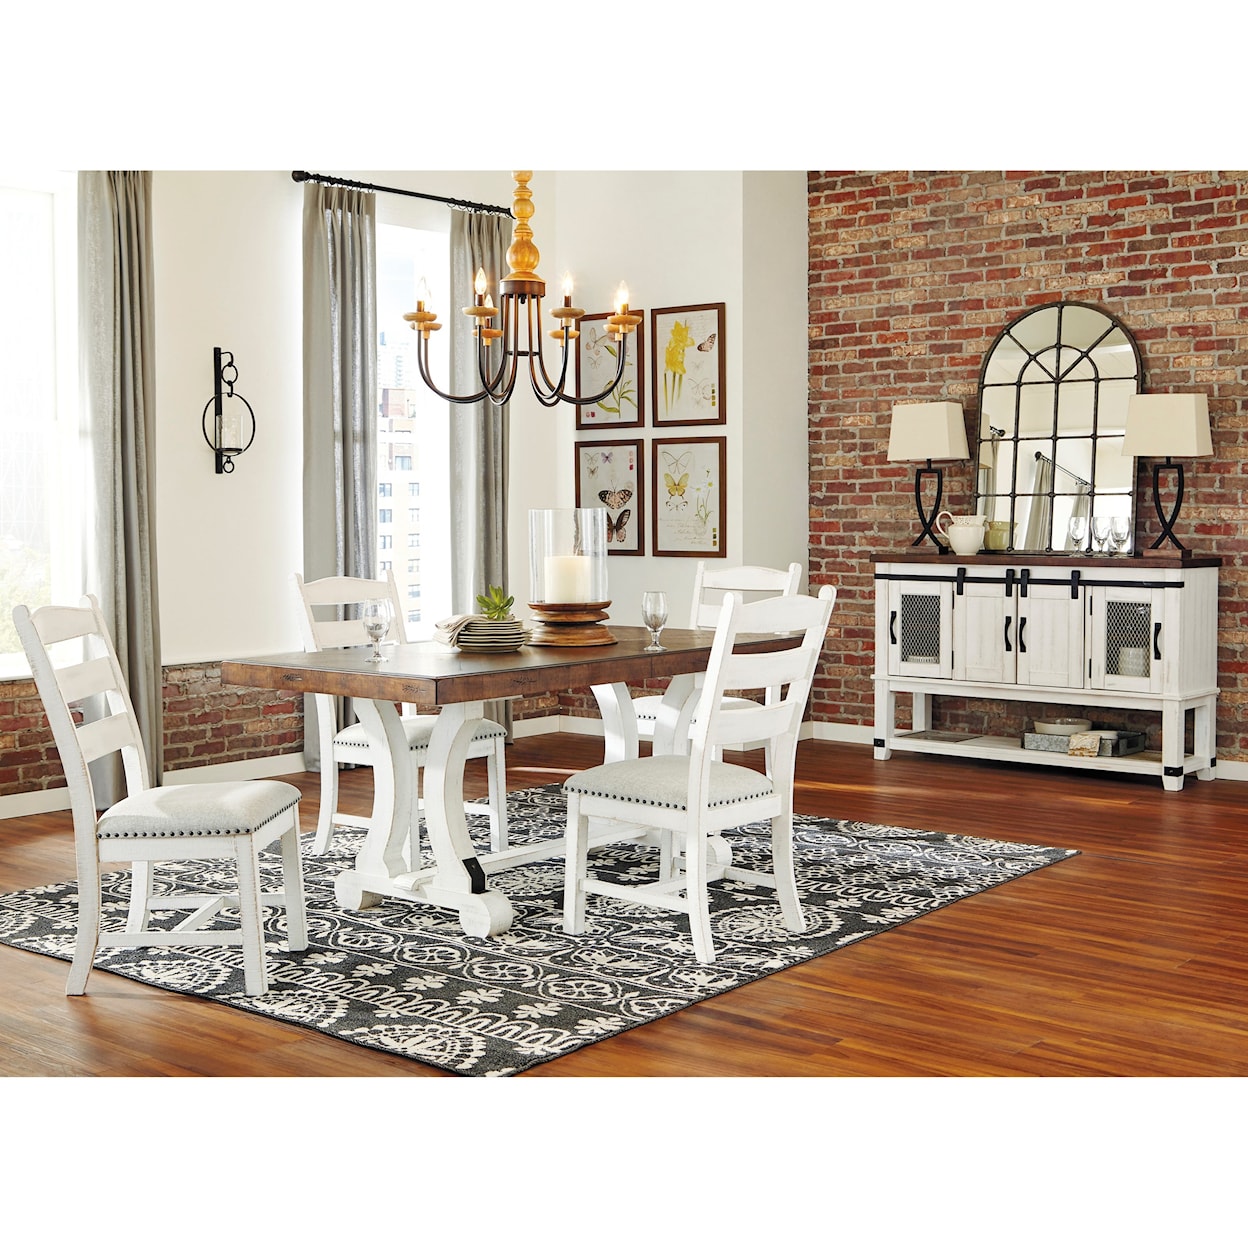 Signature Design by Ashley Valebeck Casual Dining Room Group